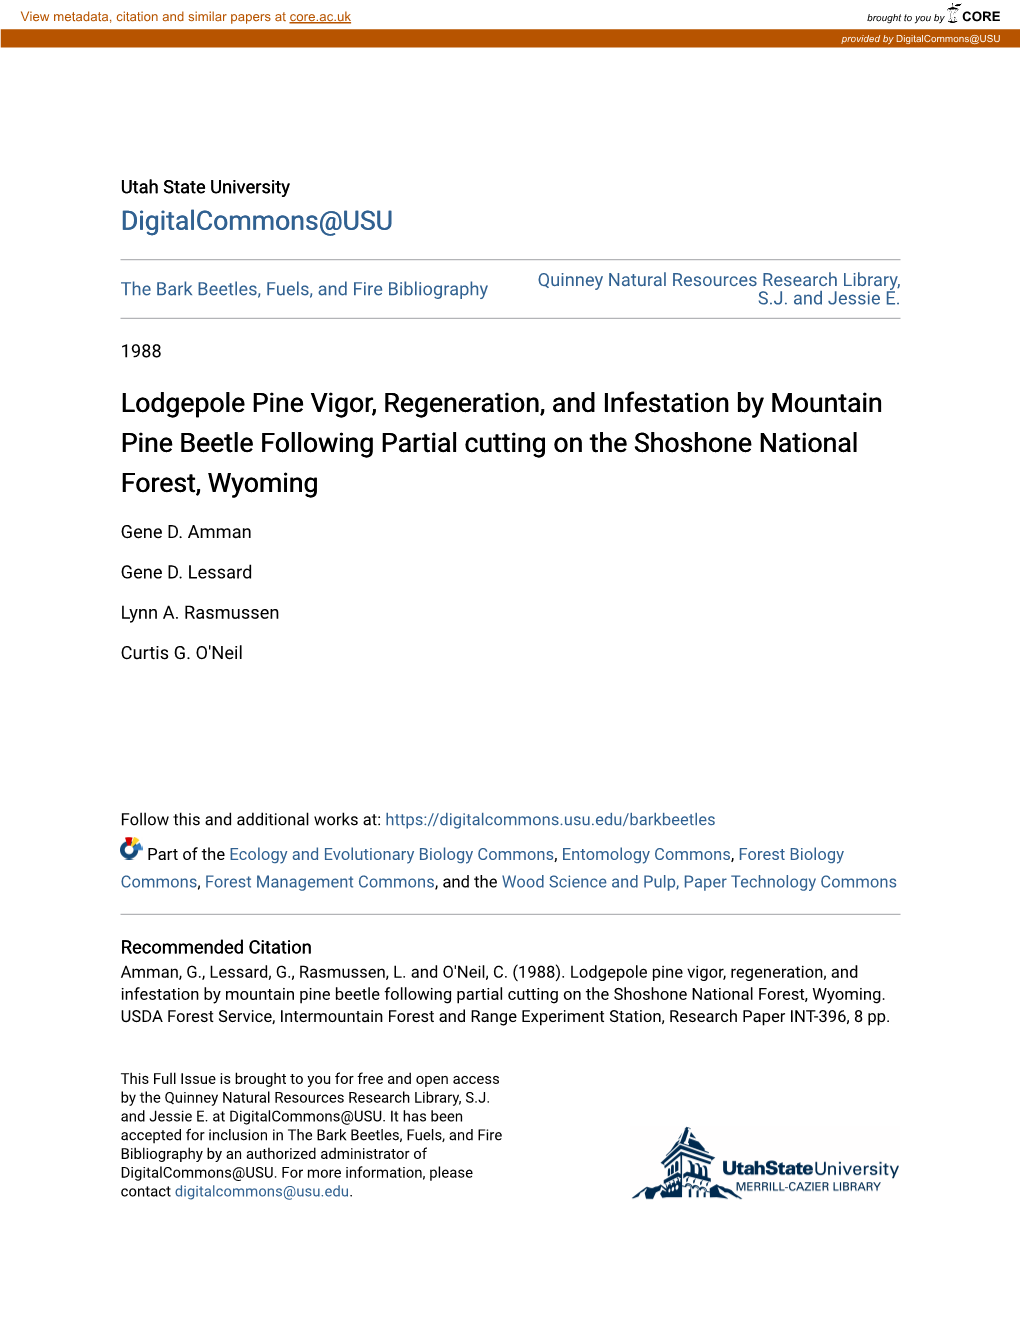 Lodgepole Pine Vigor, Regeneration, and Infestation by Mountain Pine Beetle Following Partial Cutting on the Shoshone National Forest, Wyoming